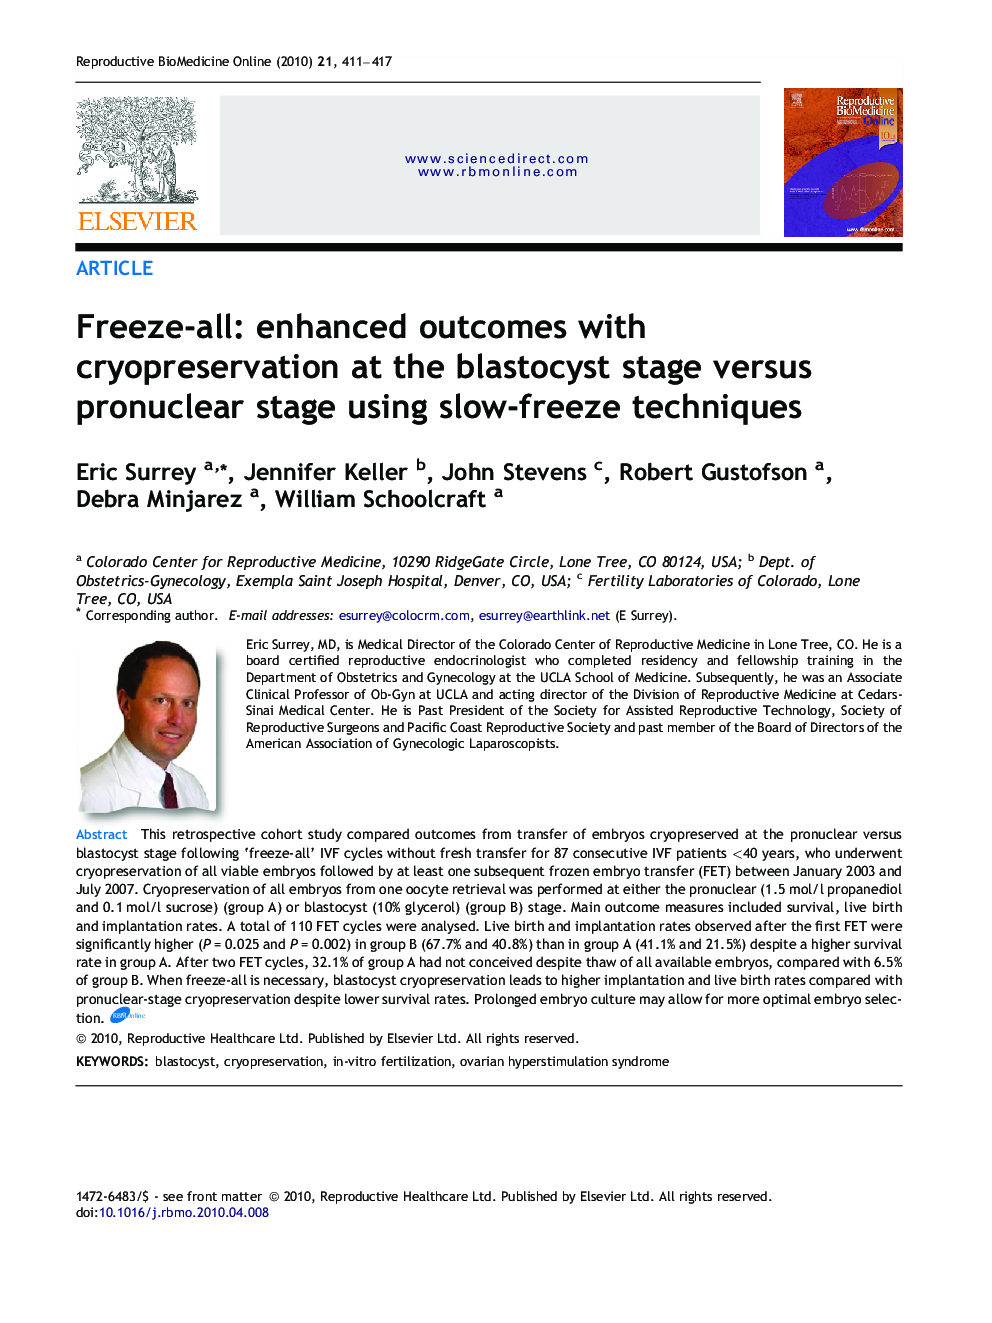 Freeze-all: enhanced outcomes with cryopreservation at the blastocyst stage versus pronuclear stage using slow-freeze techniques 